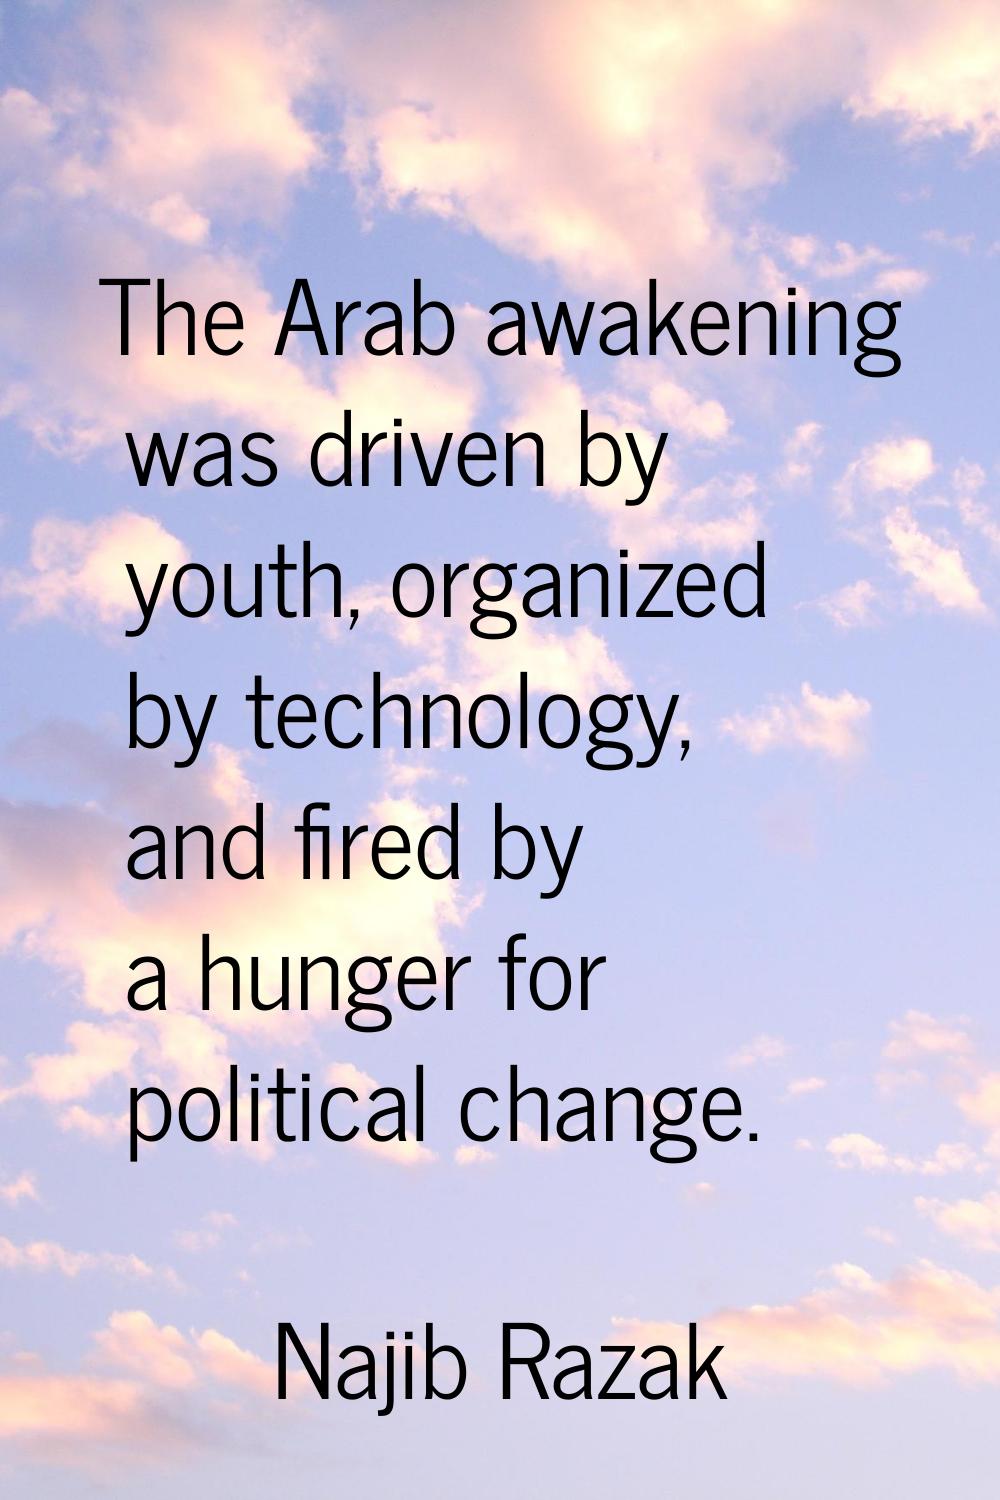 The Arab awakening was driven by youth, organized by technology, and fired by a hunger for politica